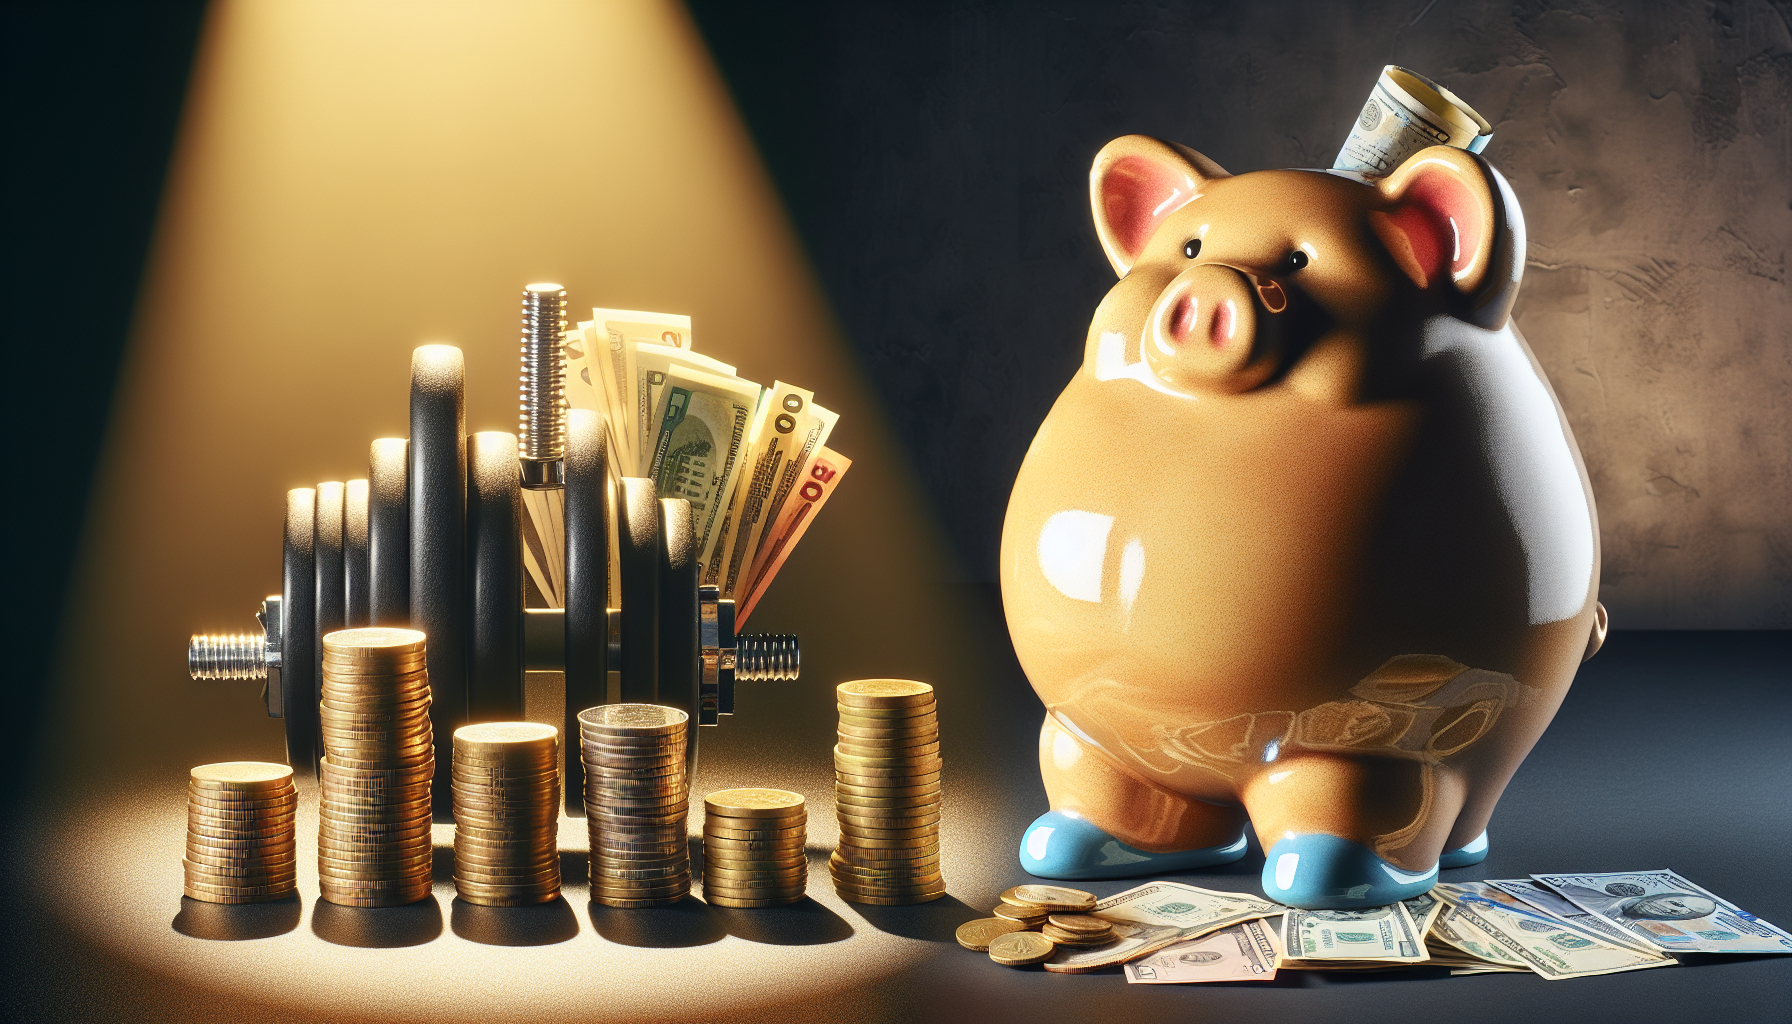 Comparison of monthly fee and money in a piggy bank